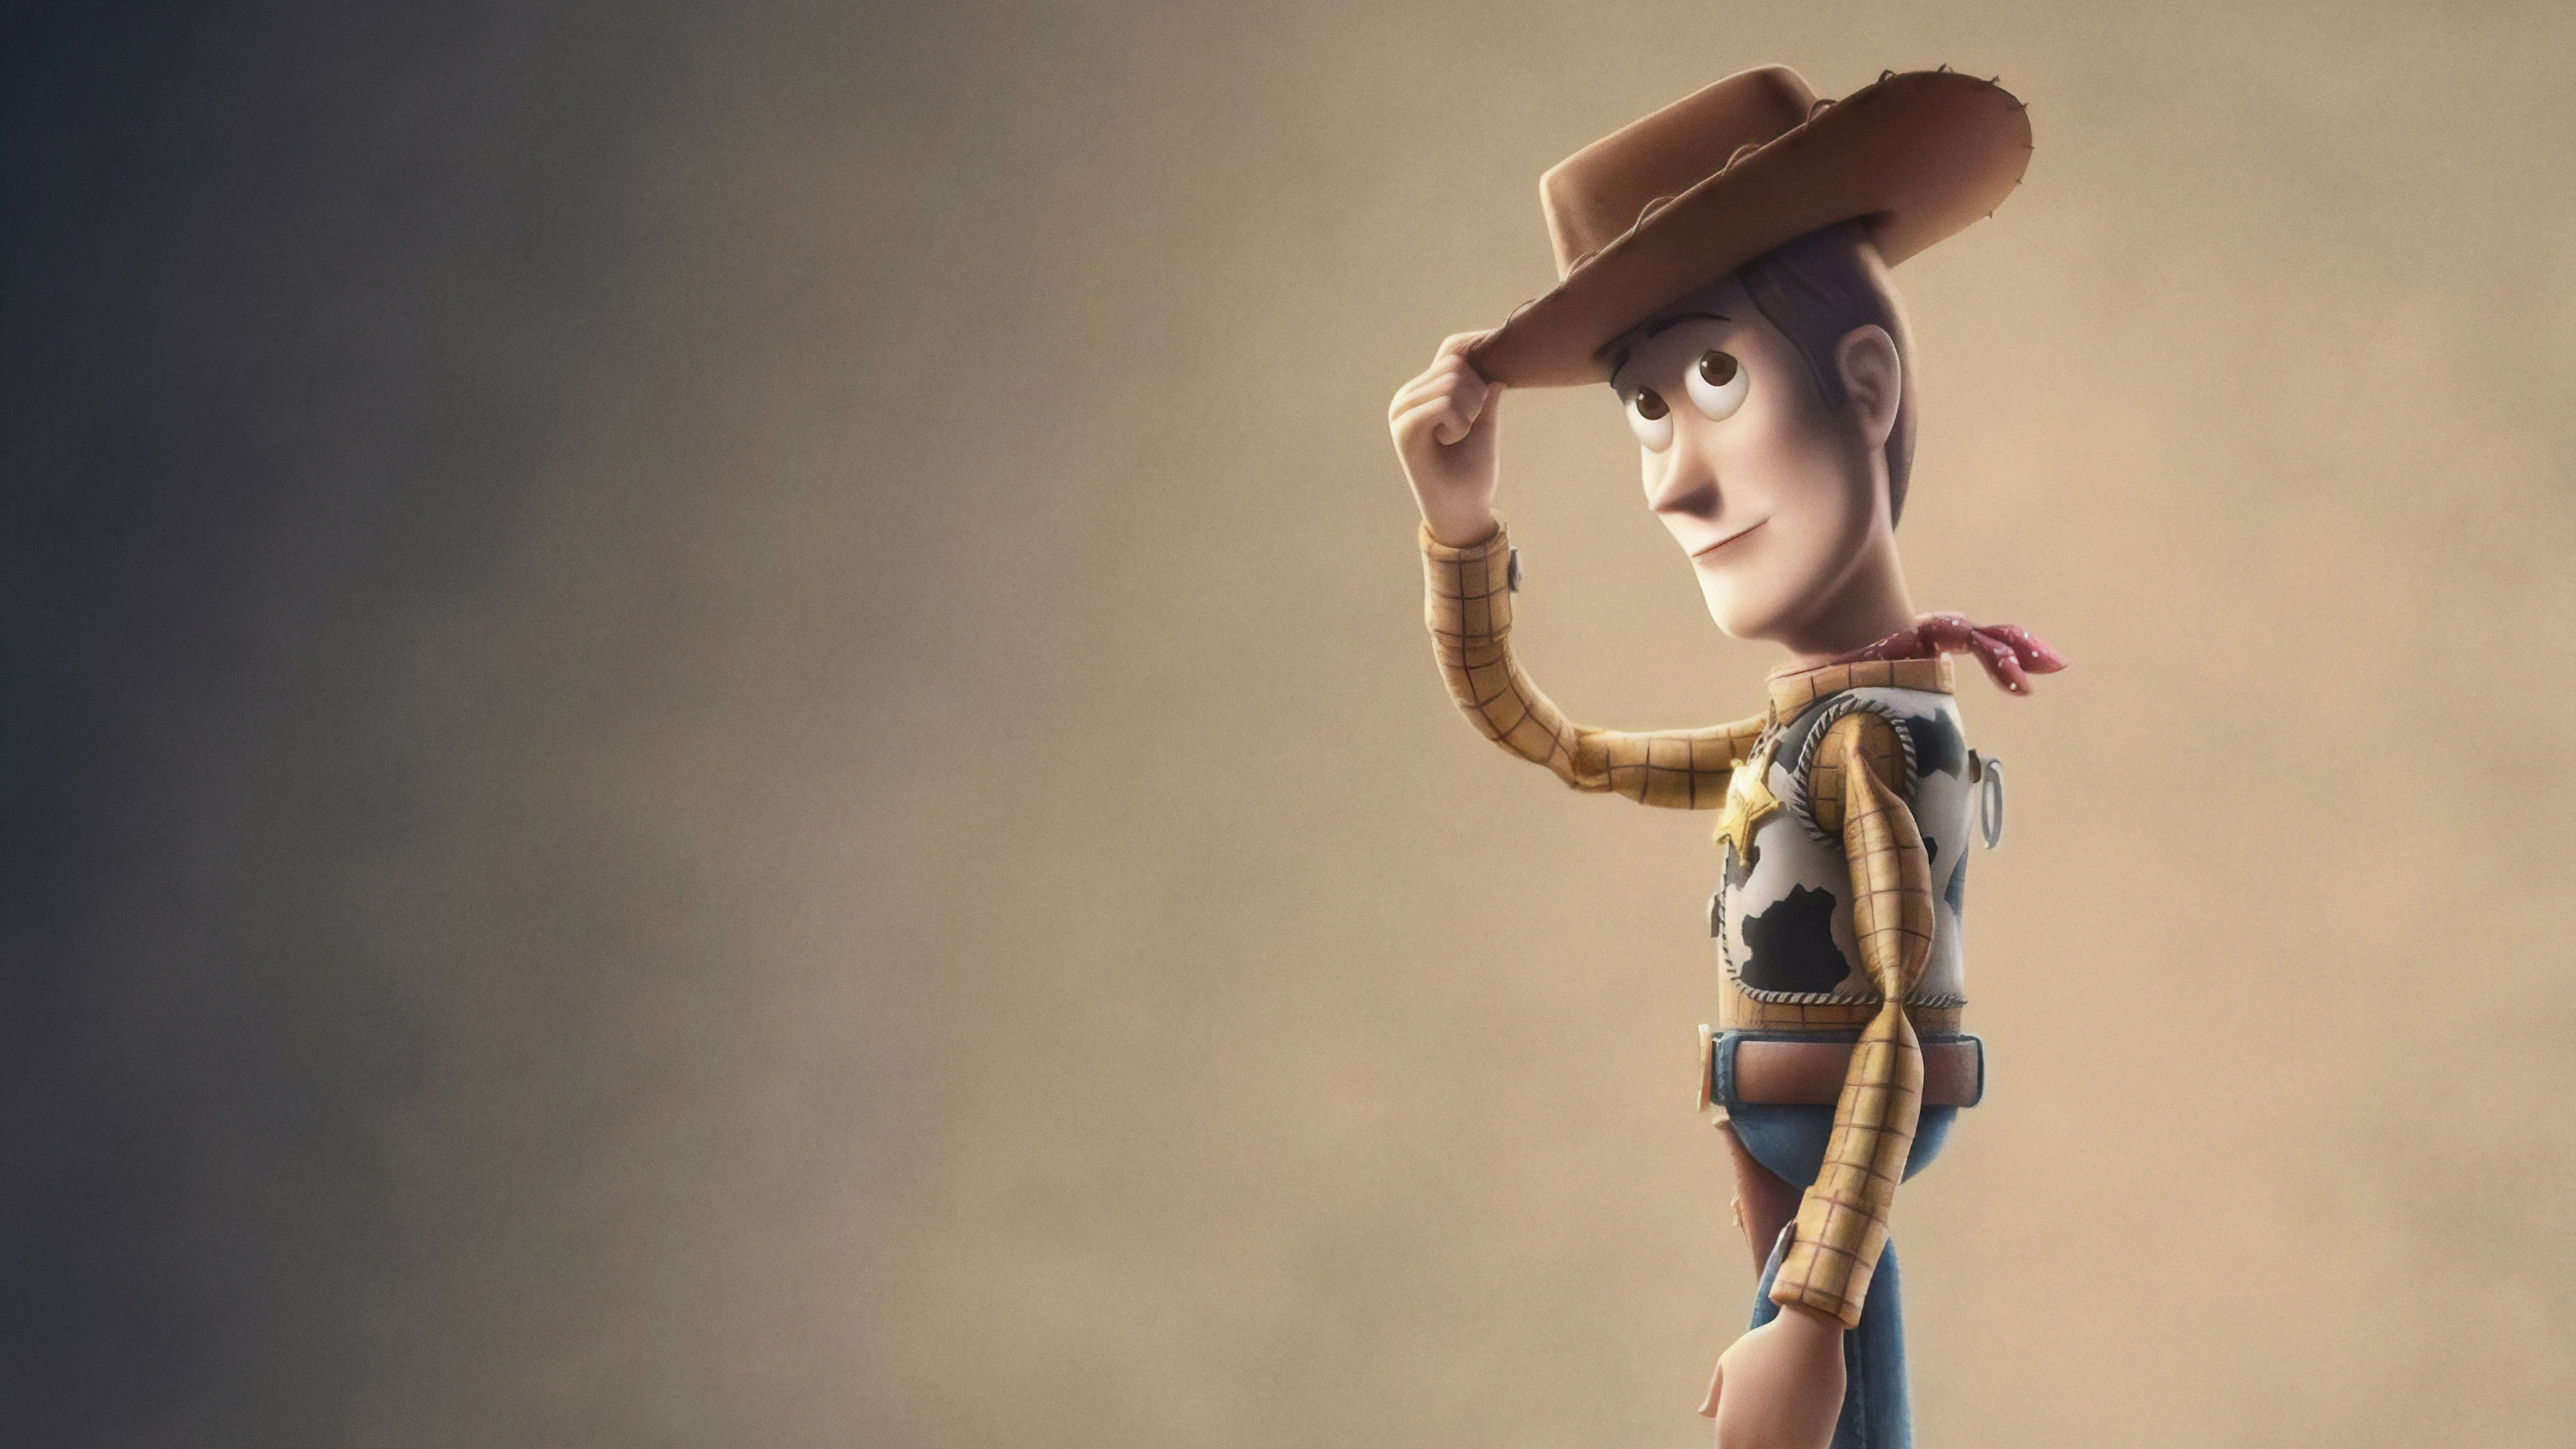 Wallpapers toy story 4 movies 2019 Movies on the desktop